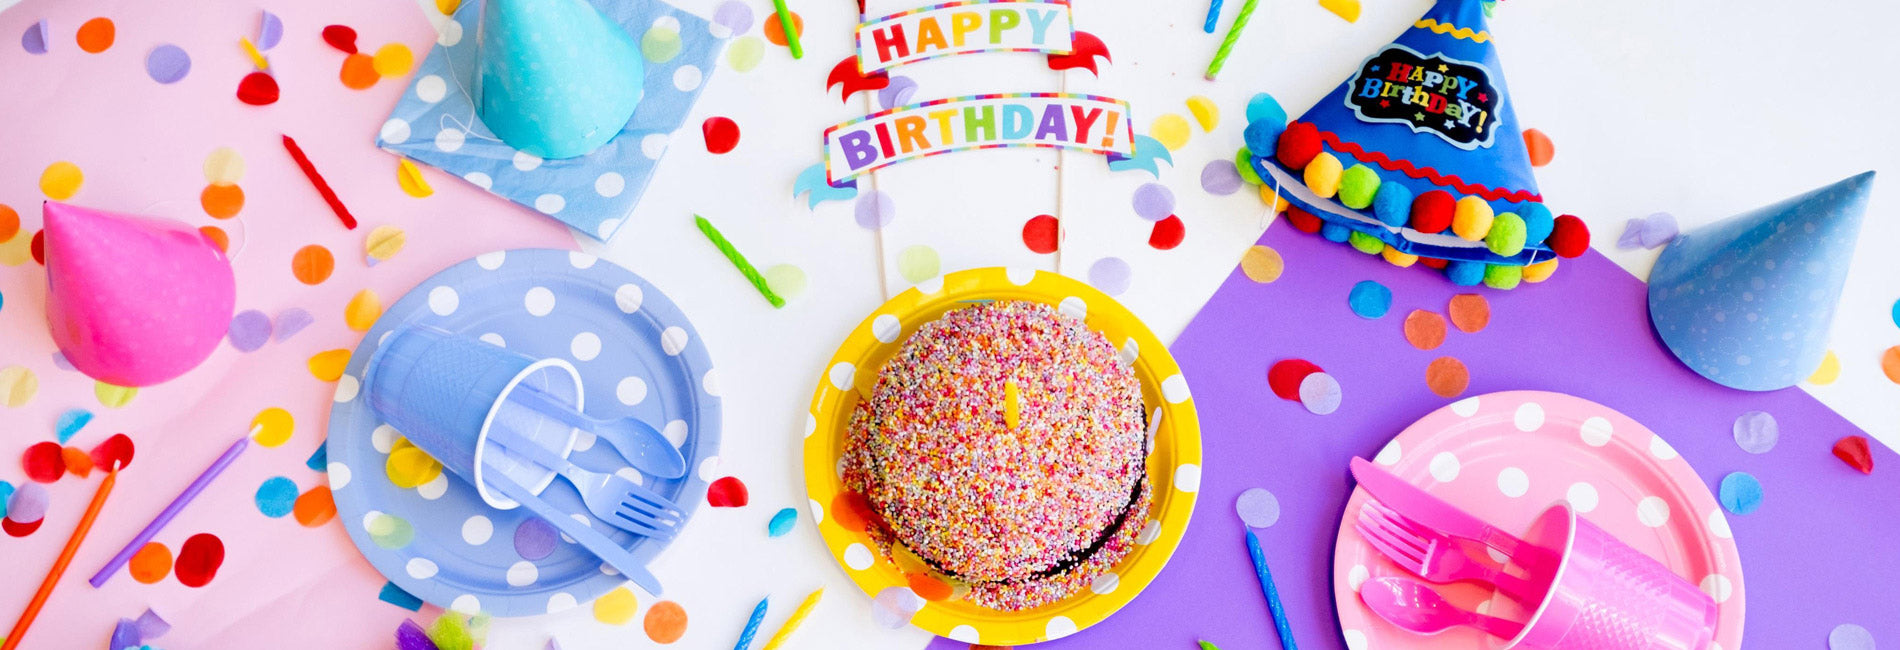 colorful birthday party table